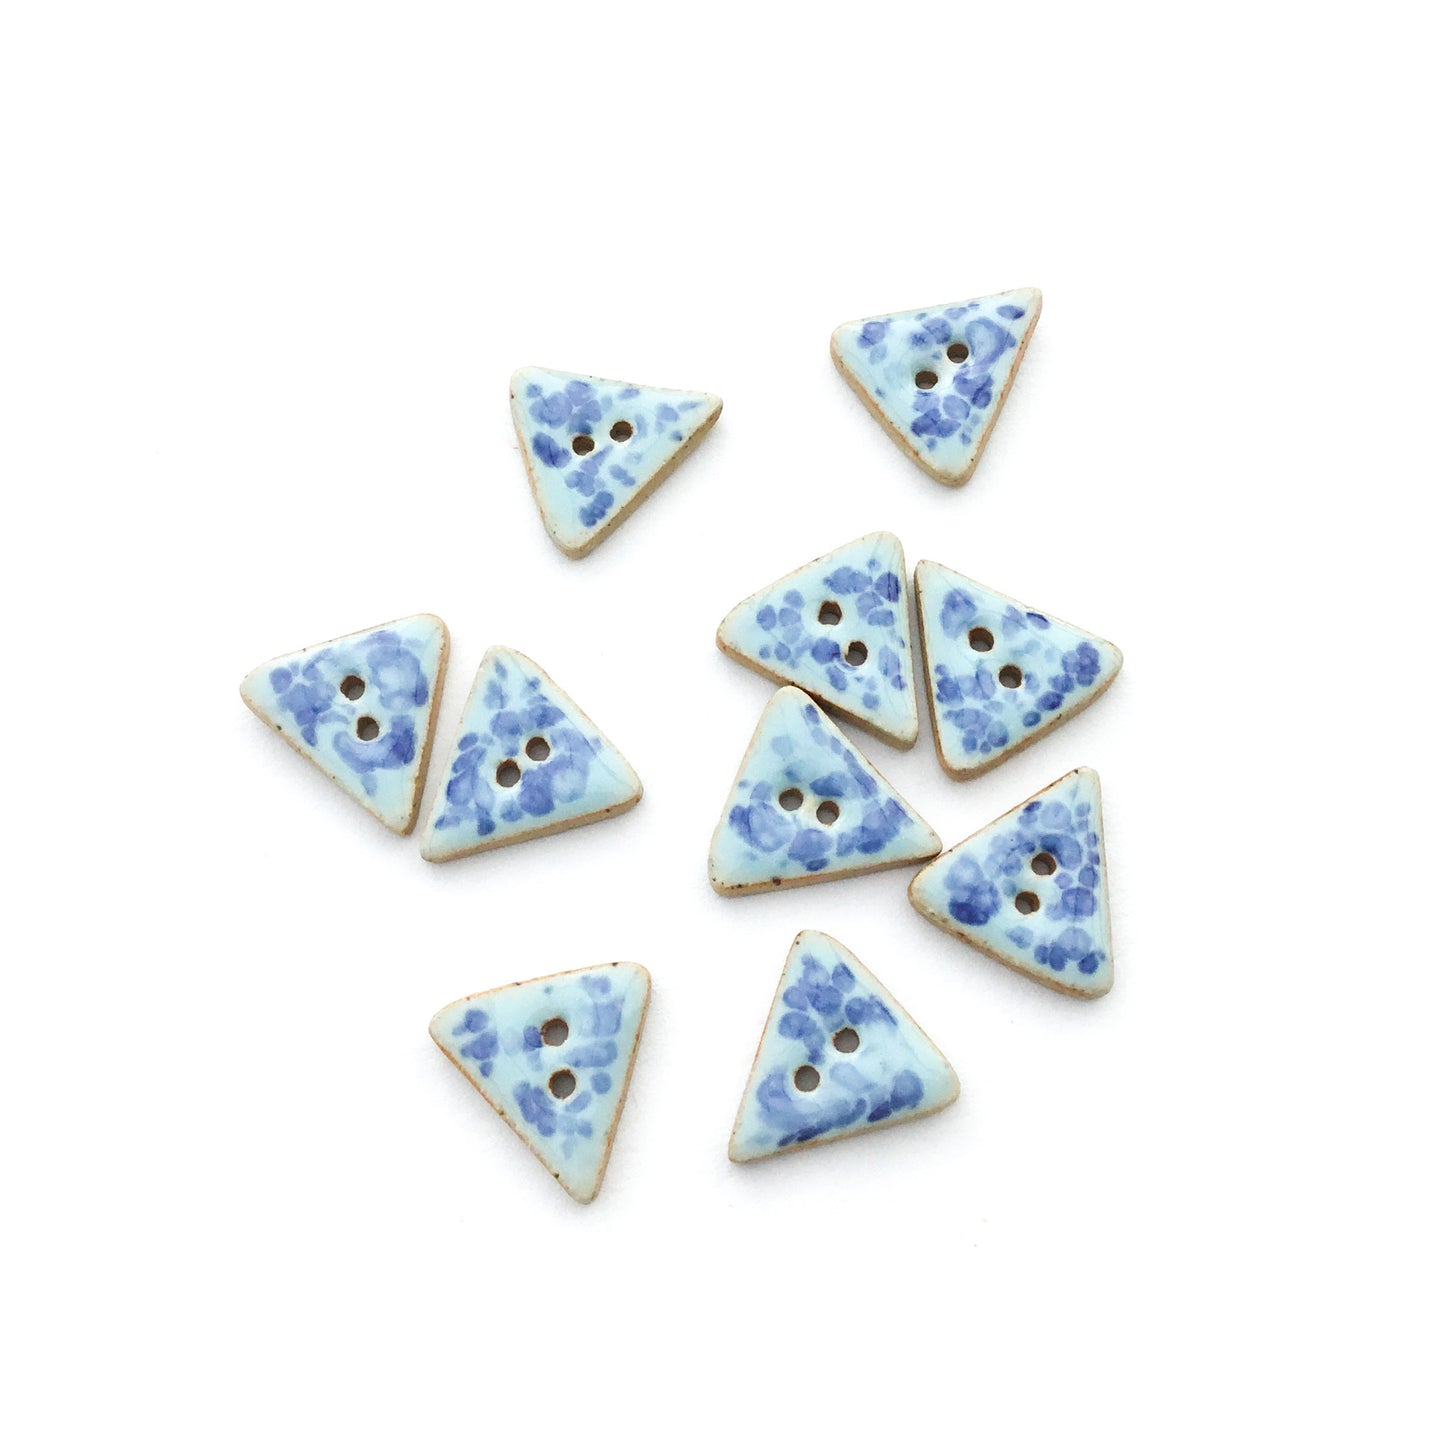 Speckled Blue Stoneware Buttons  5/8" - 10 Pack